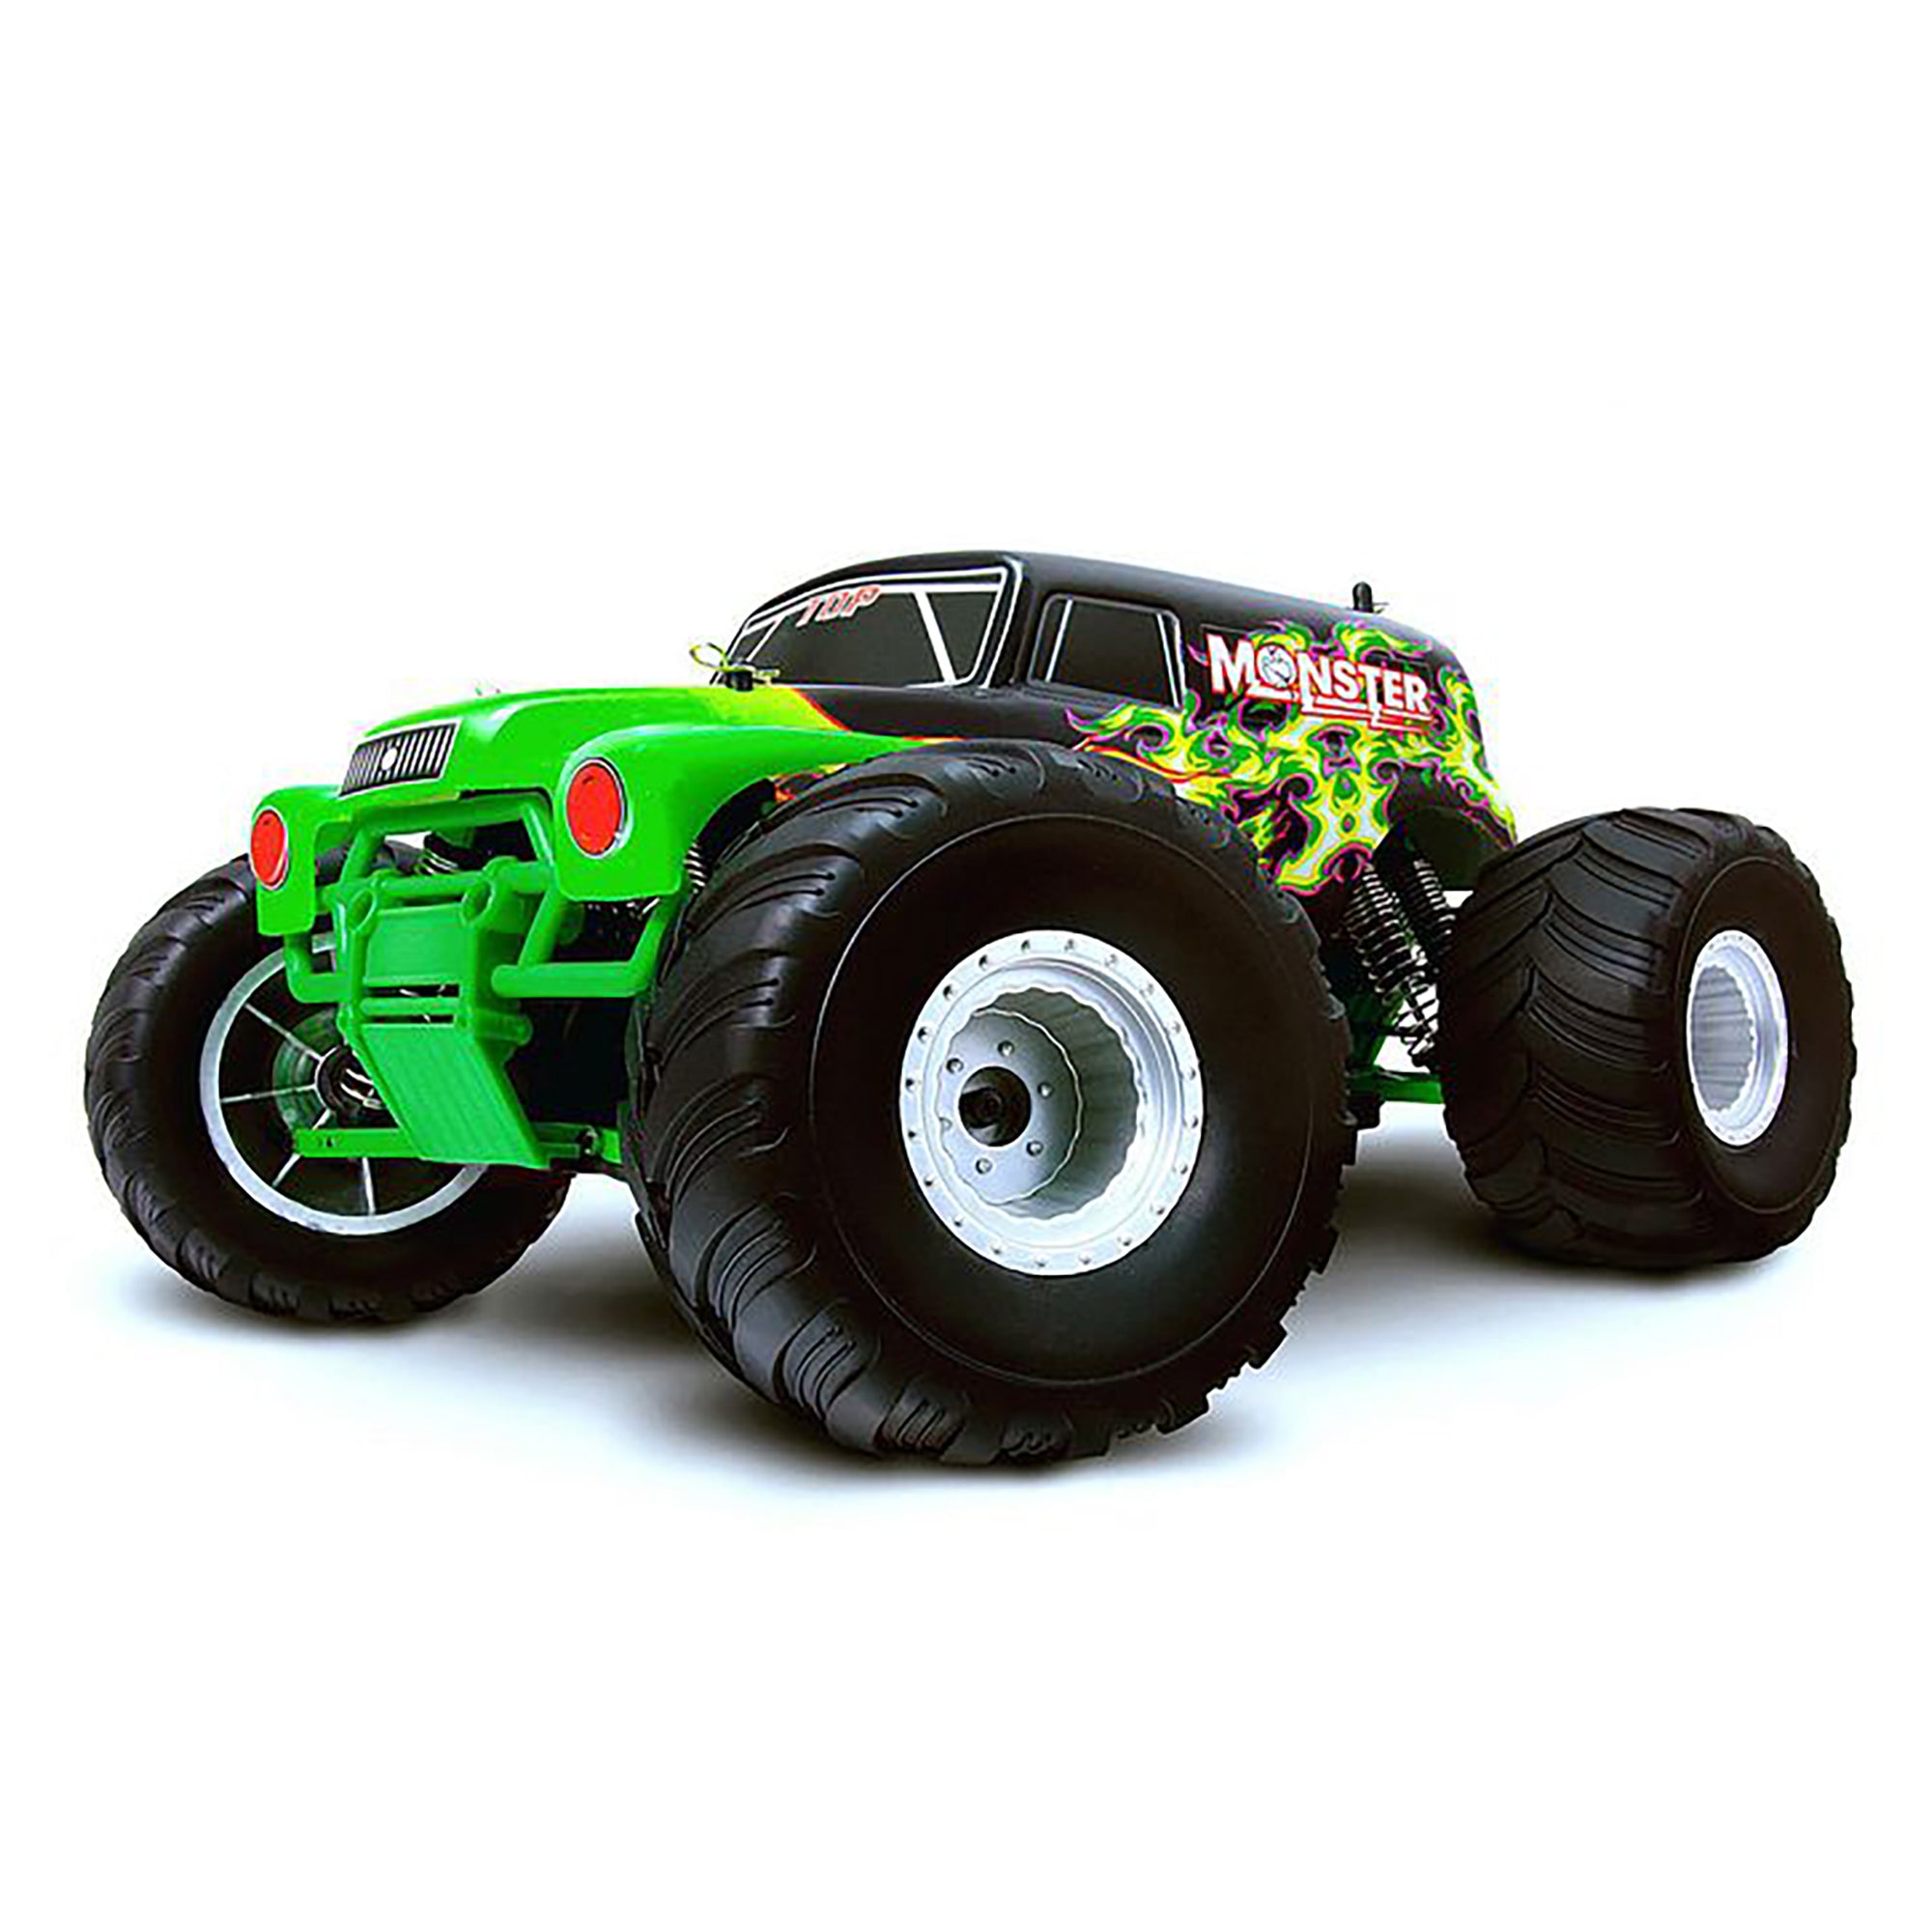 HSP Racing TOP Monster Truck Special Edition Green 2.4GHz 1/10 Brushless 4WD Off Road RTR RC Truck